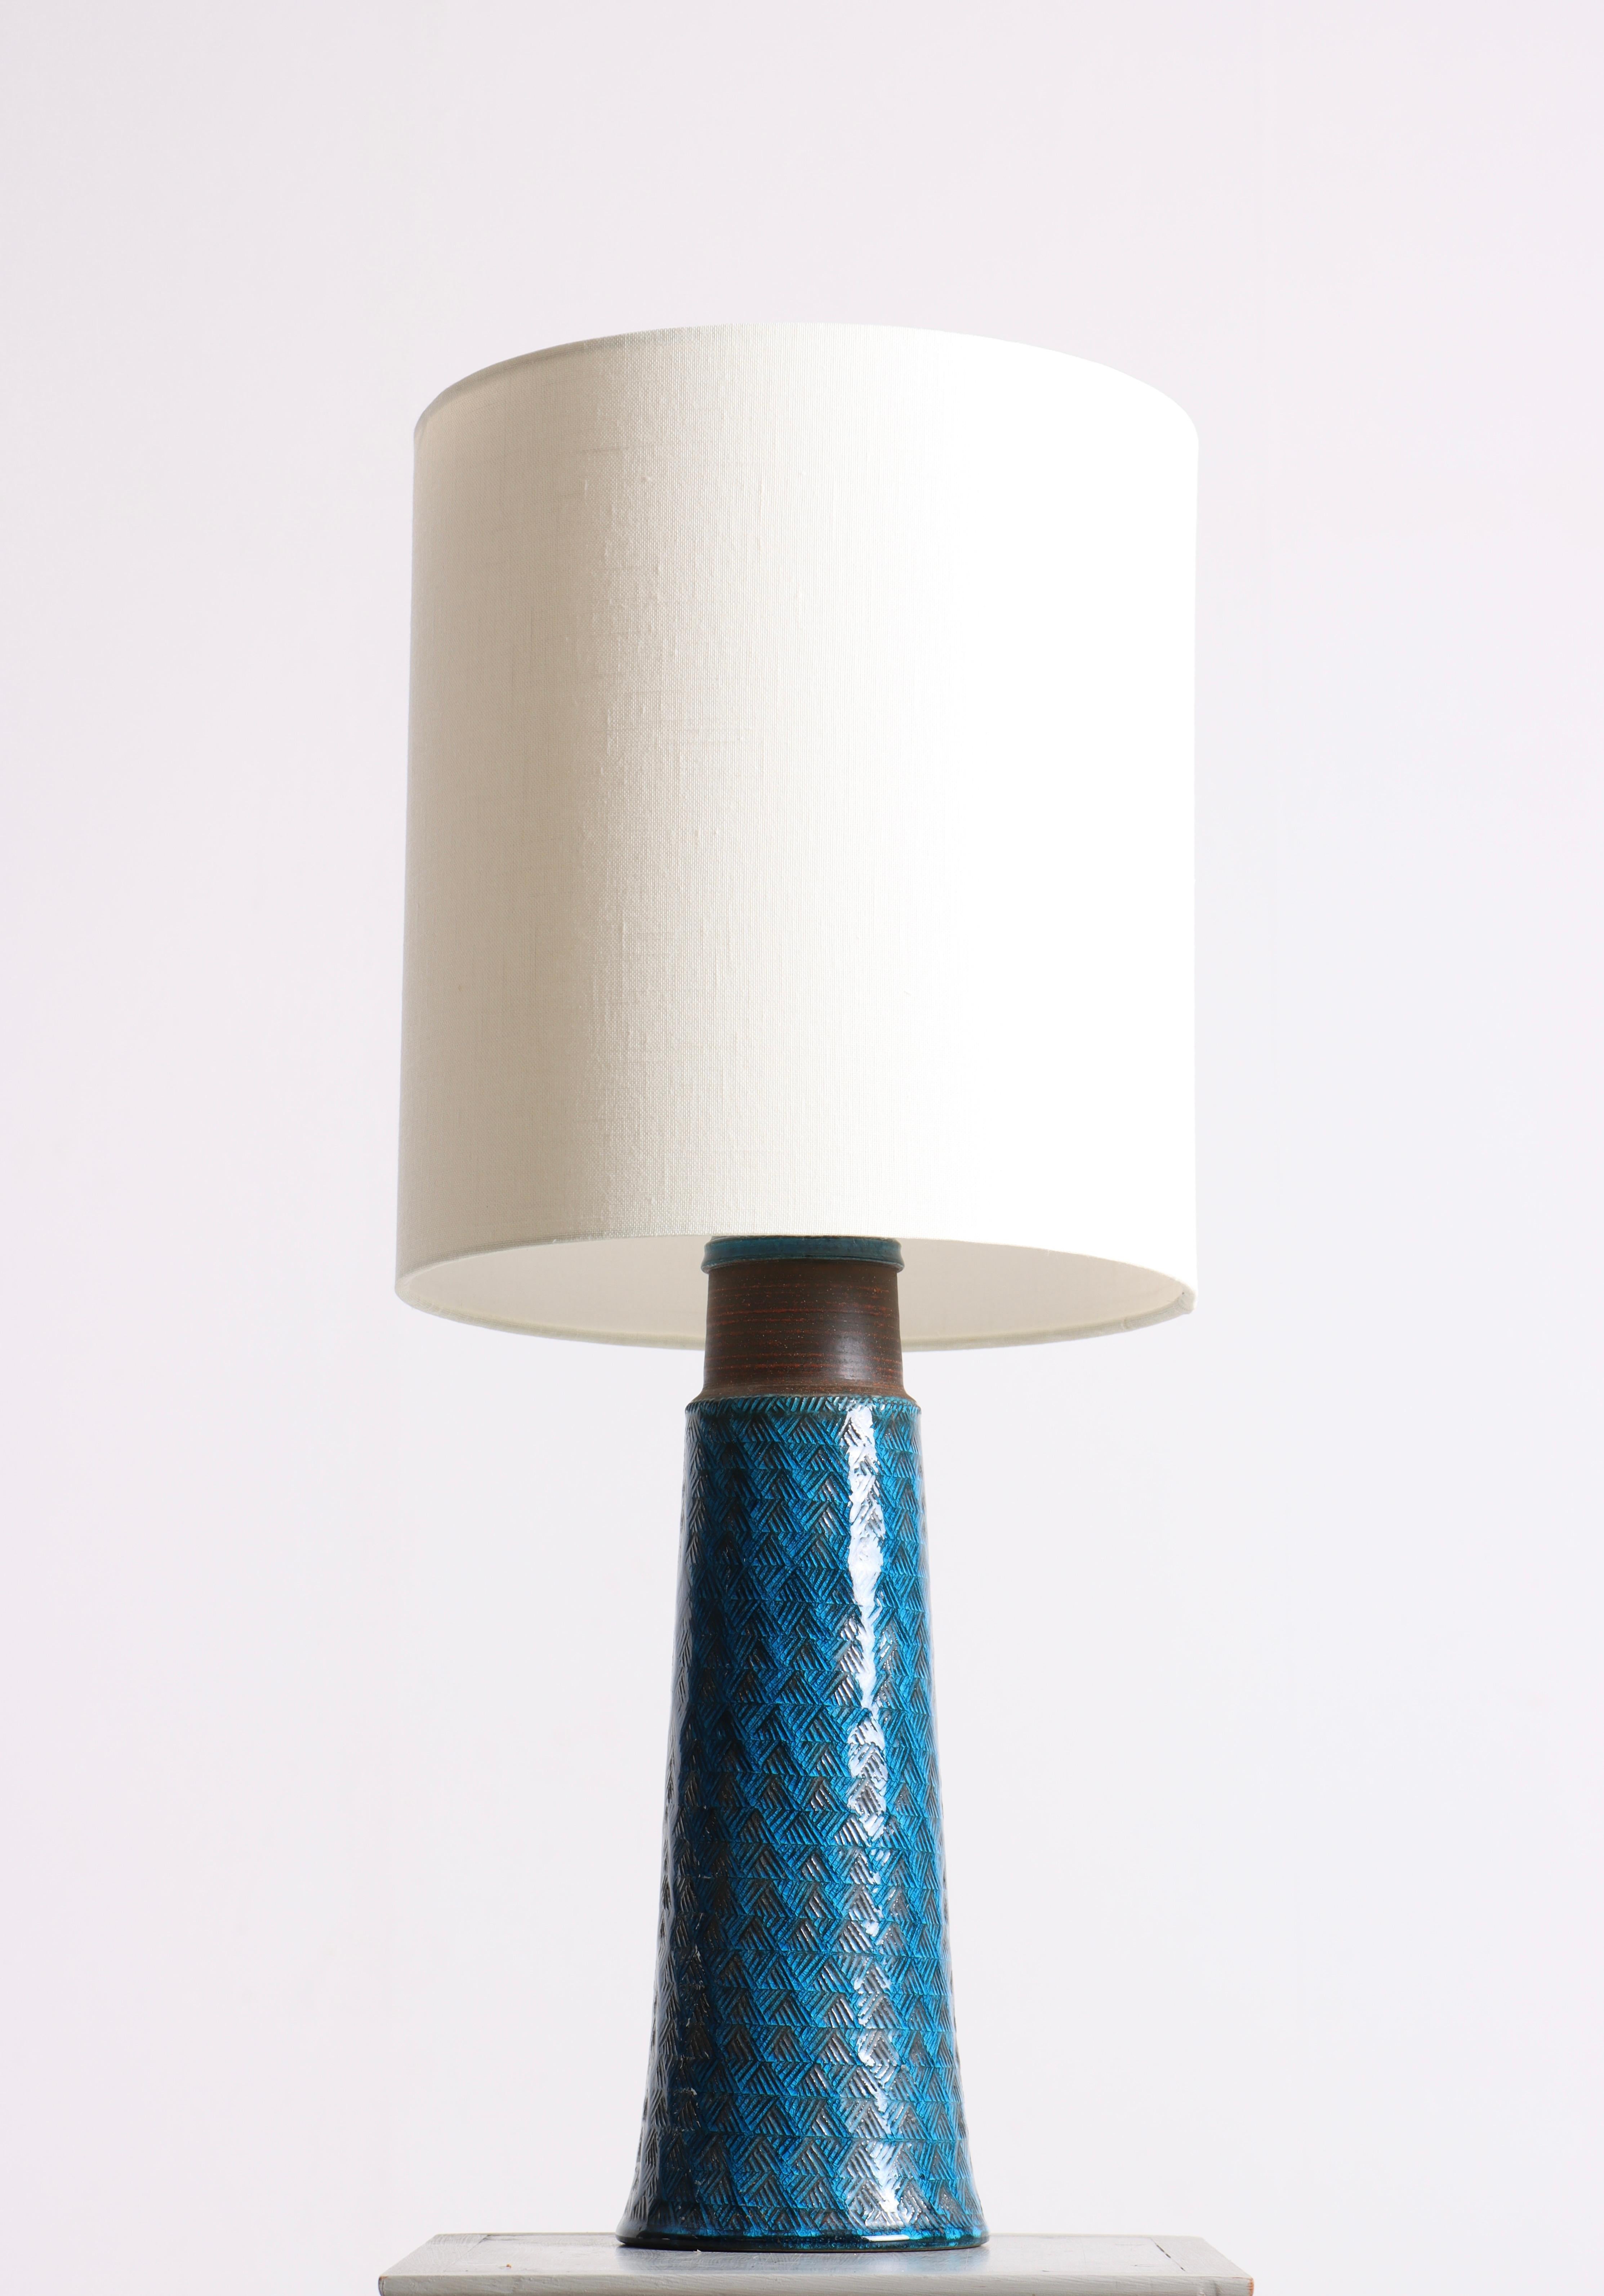 Mid-20th Century Midcentury Table Lamp by Nils Kähler, Made in Denmark, 1960s For Sale